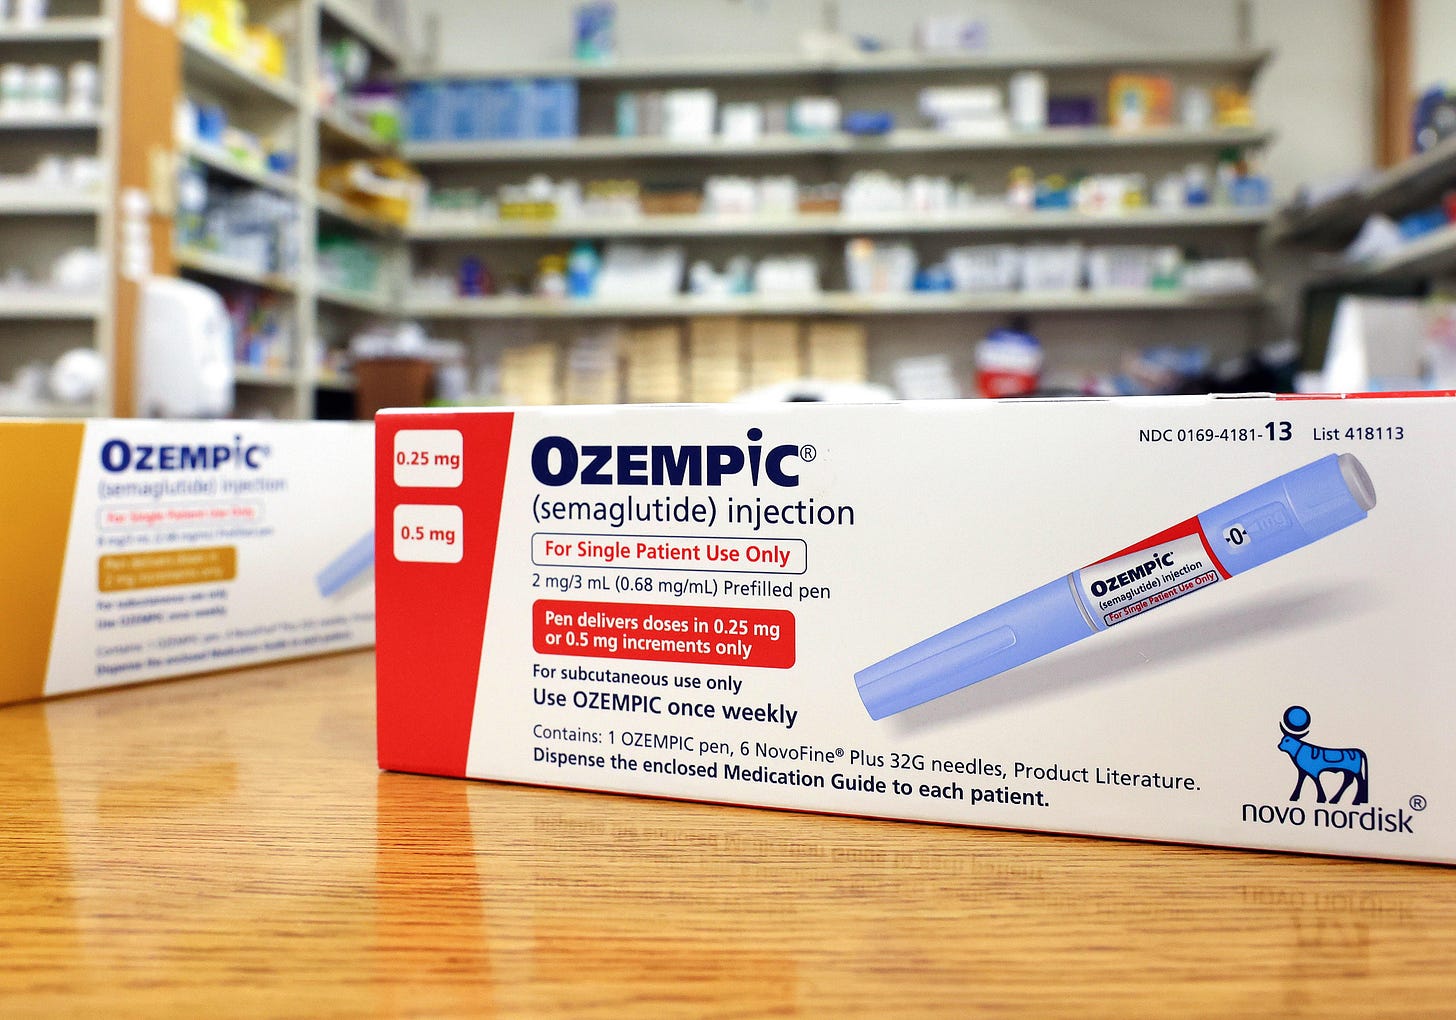 Weight loss drugs: EU expands Ozempic probe over suicide risks